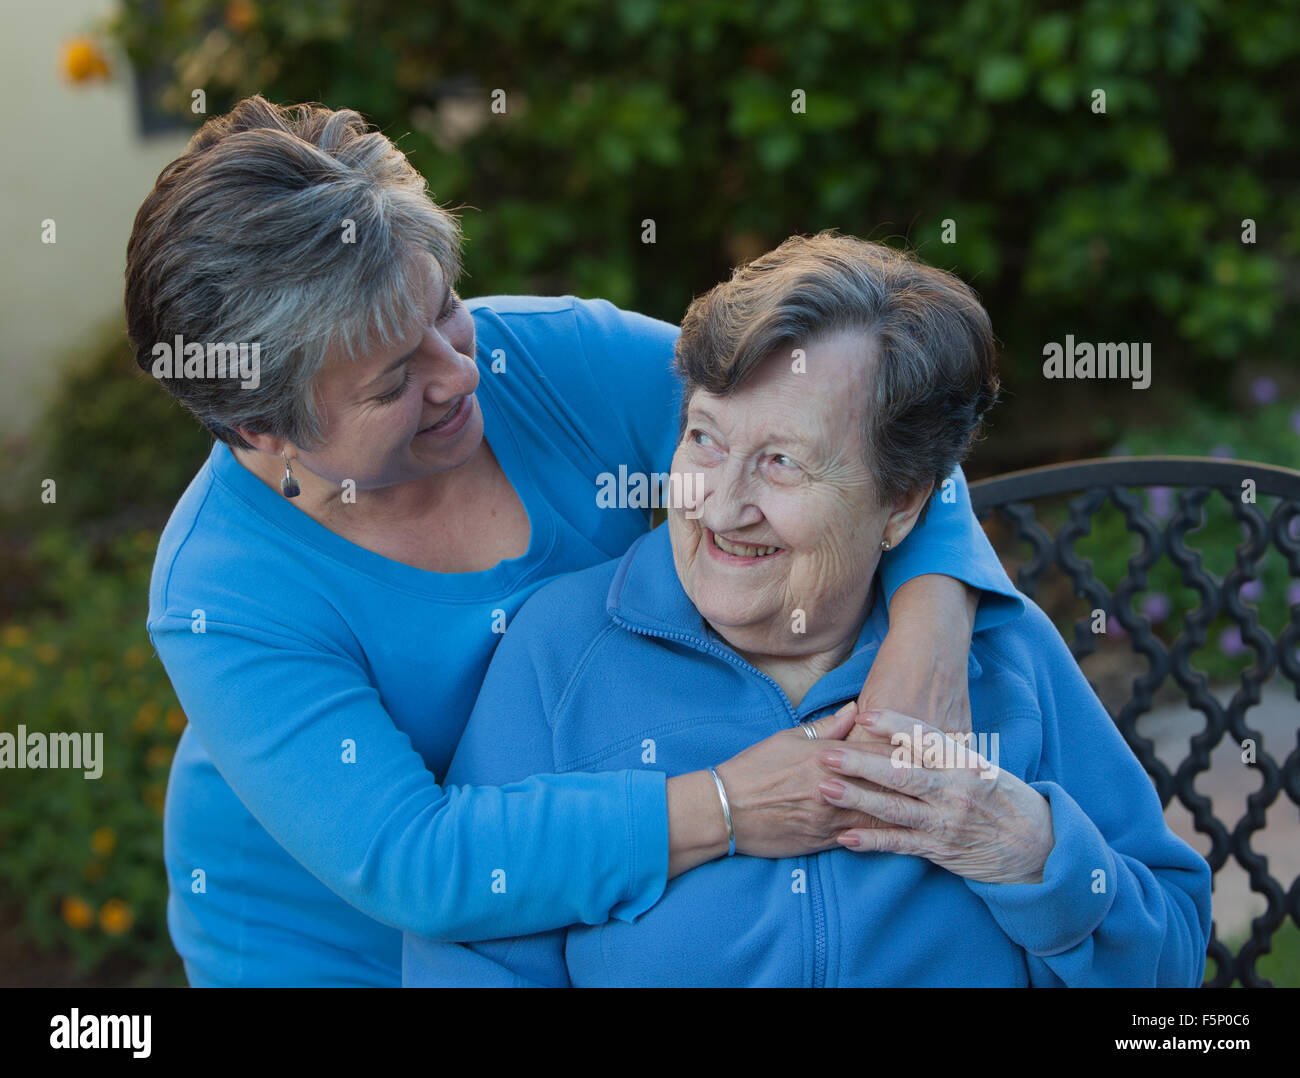 Daughter embraces mother with hands clasped who is sitting on a wrought iron bench in the garden. Stock Photo